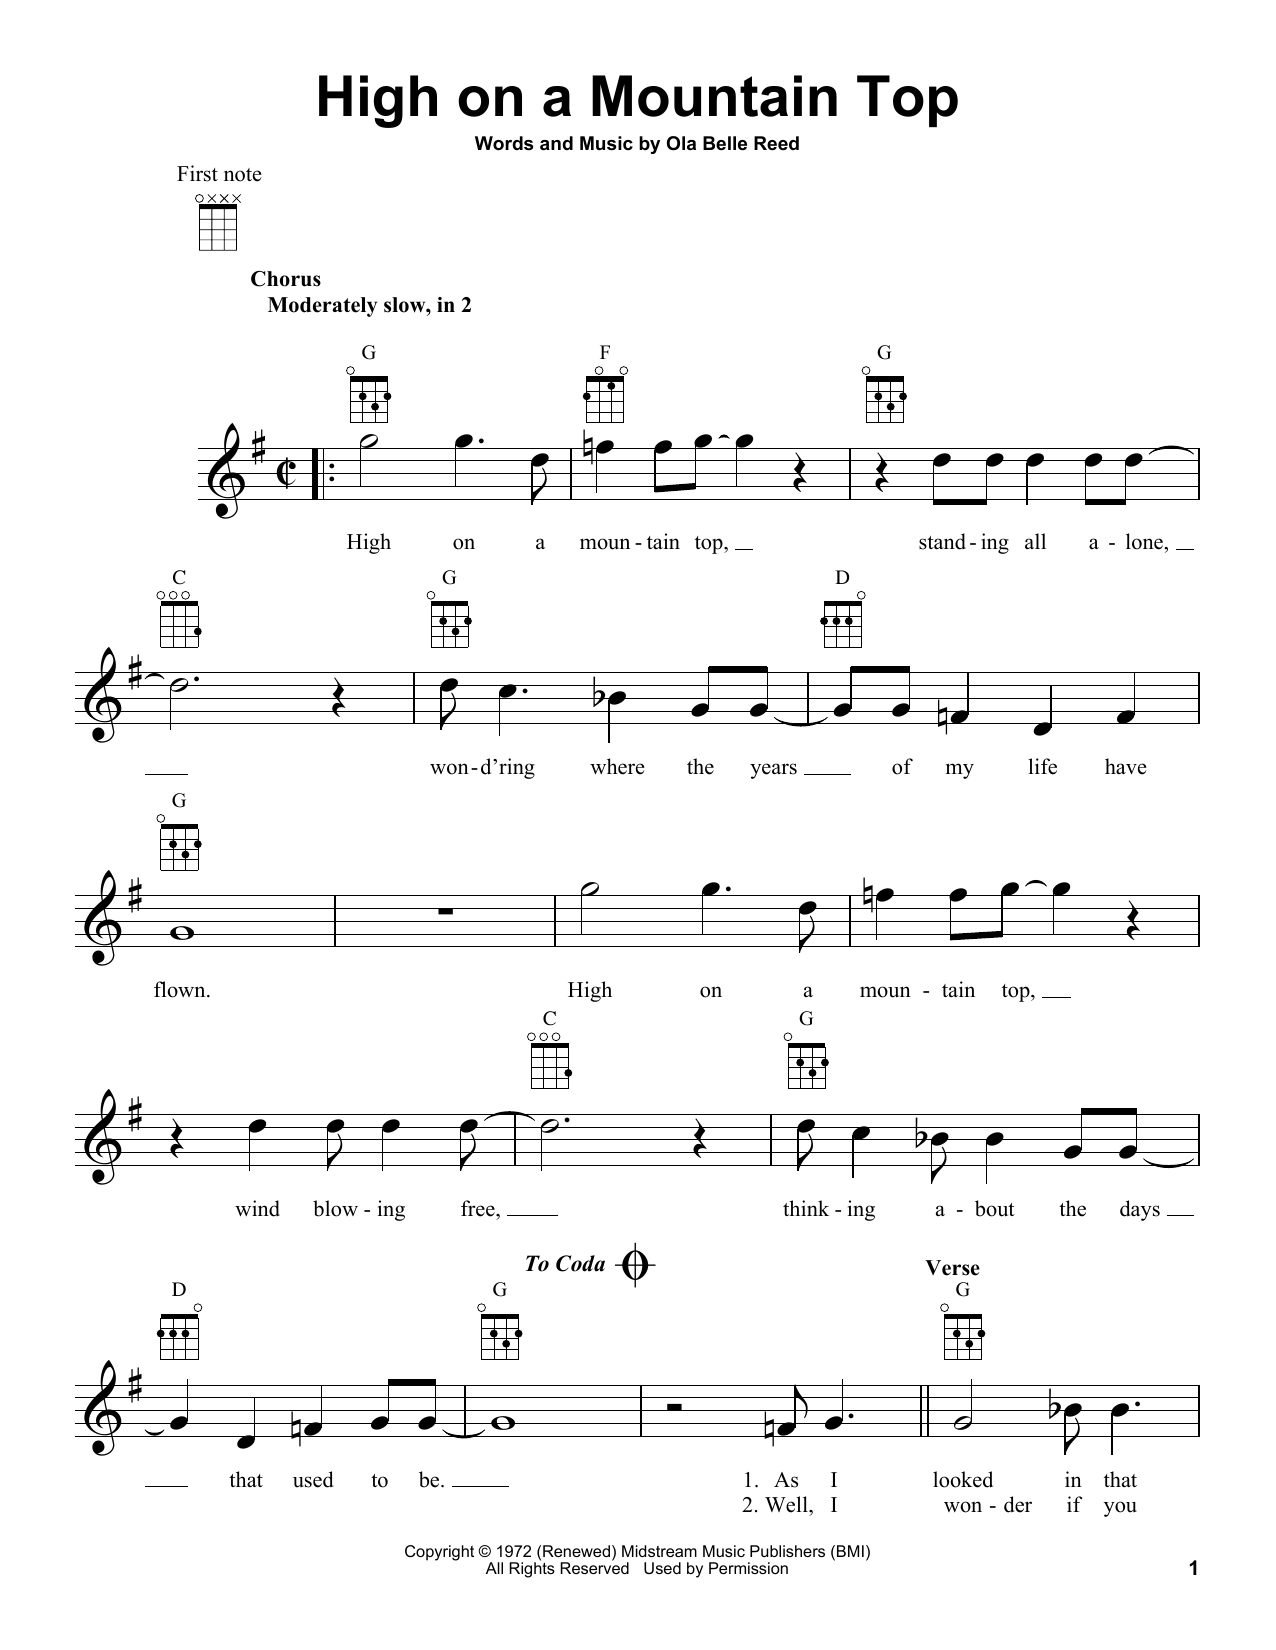 Download Ola Belle Reed High On A Mountain Top Sheet Music